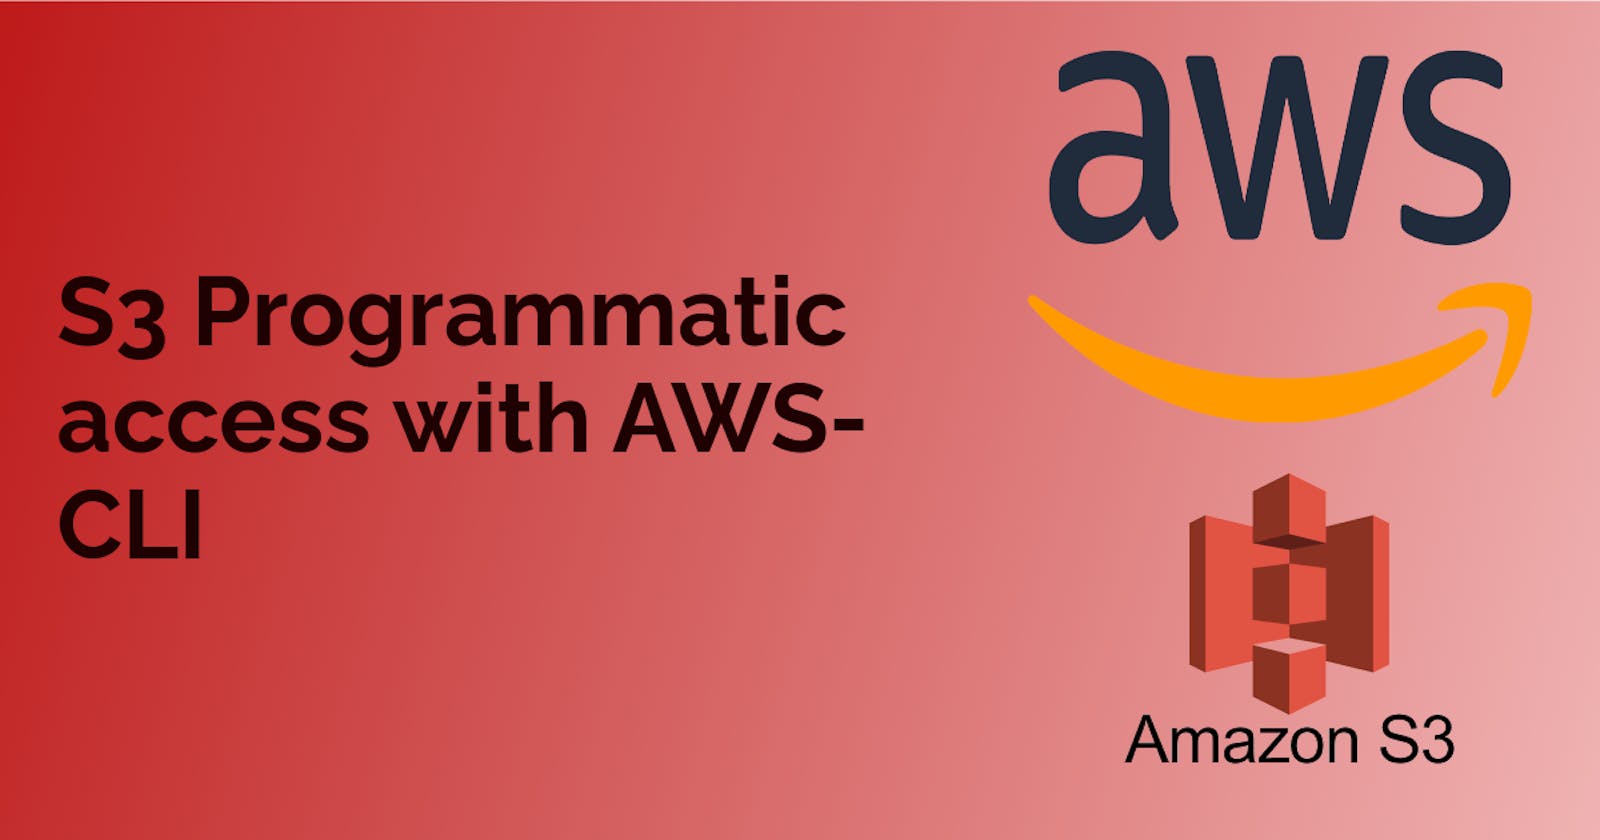 S3 Programmatic access with AWS-CLI